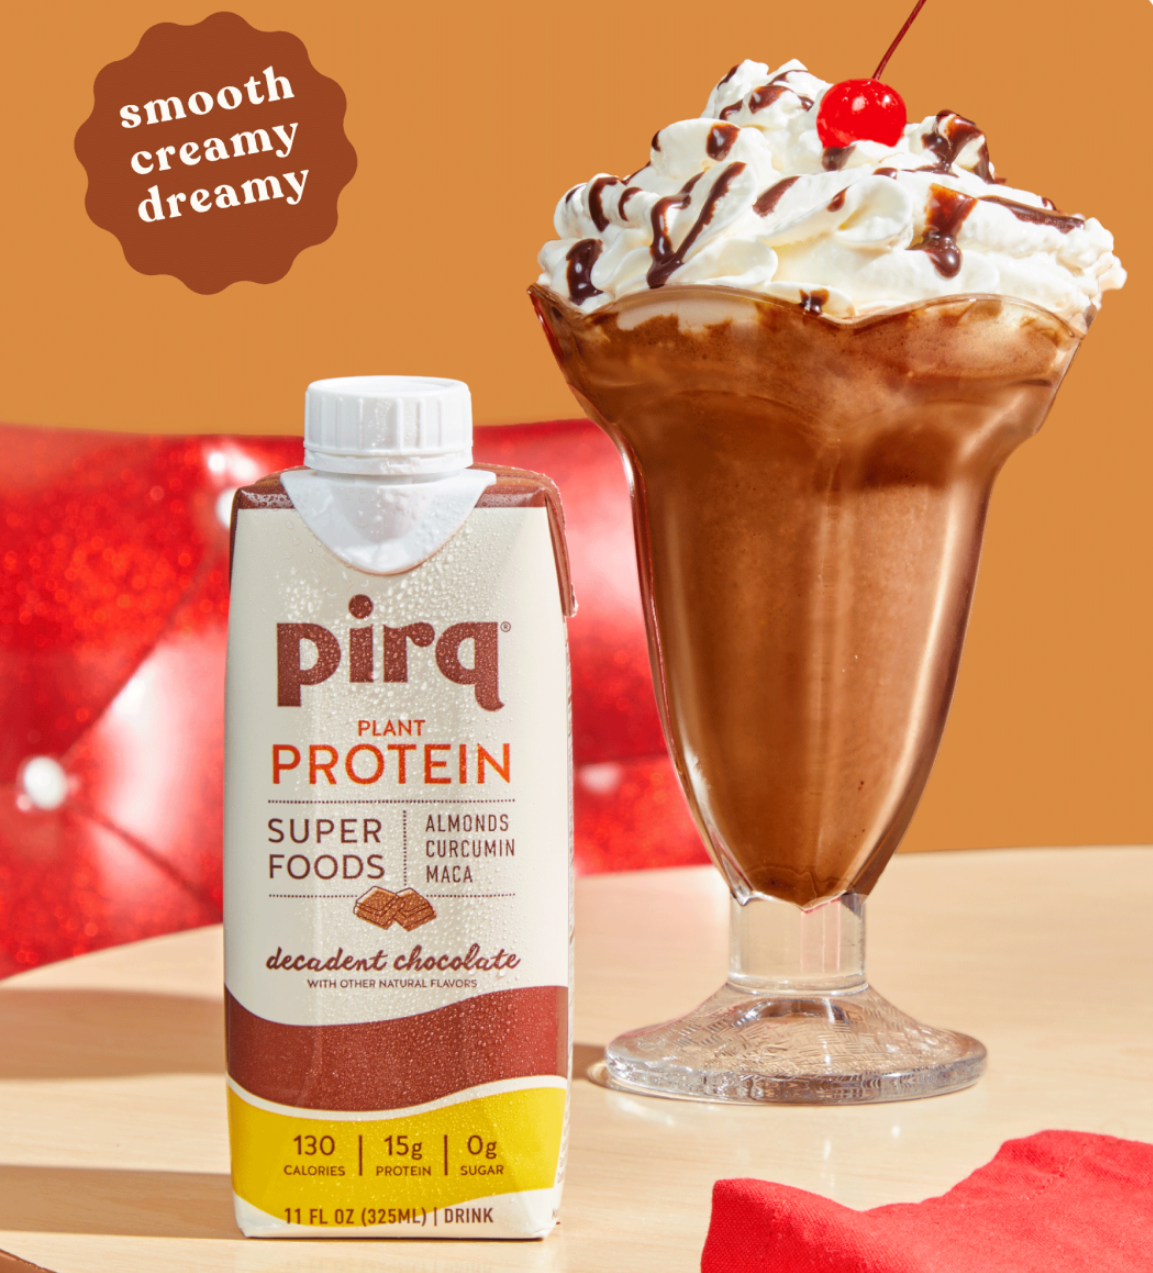 FREE 4-Pack of Pirq Protein Shake at Albertsons